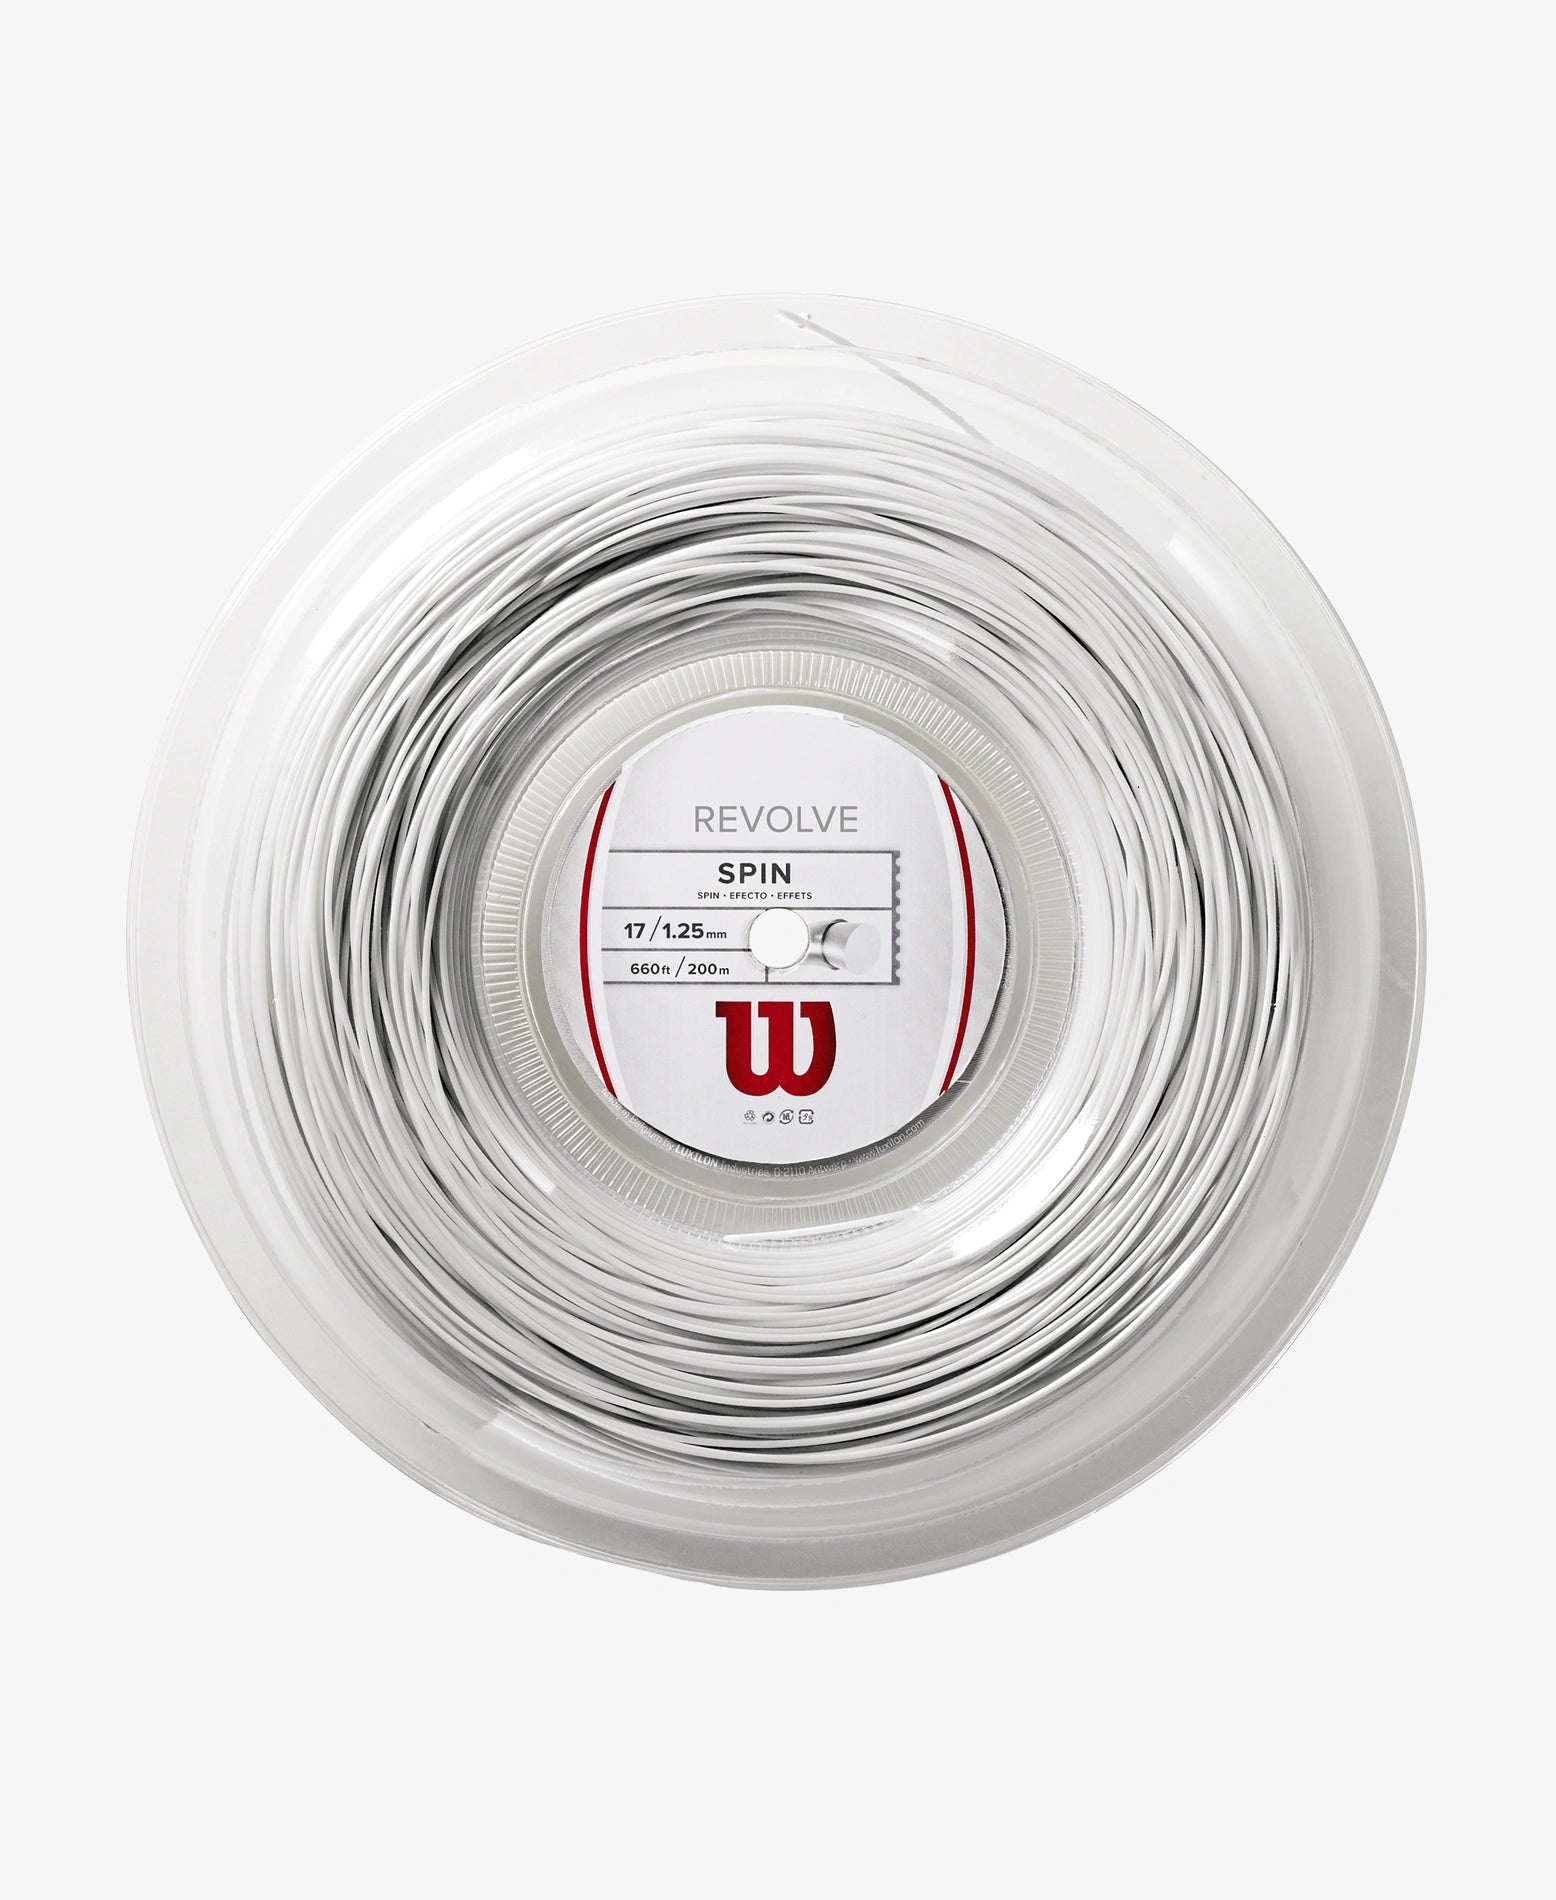 A 200m Reel of Wilson Revolve 17 Tennis String in white available for sale at GSM Sports.  